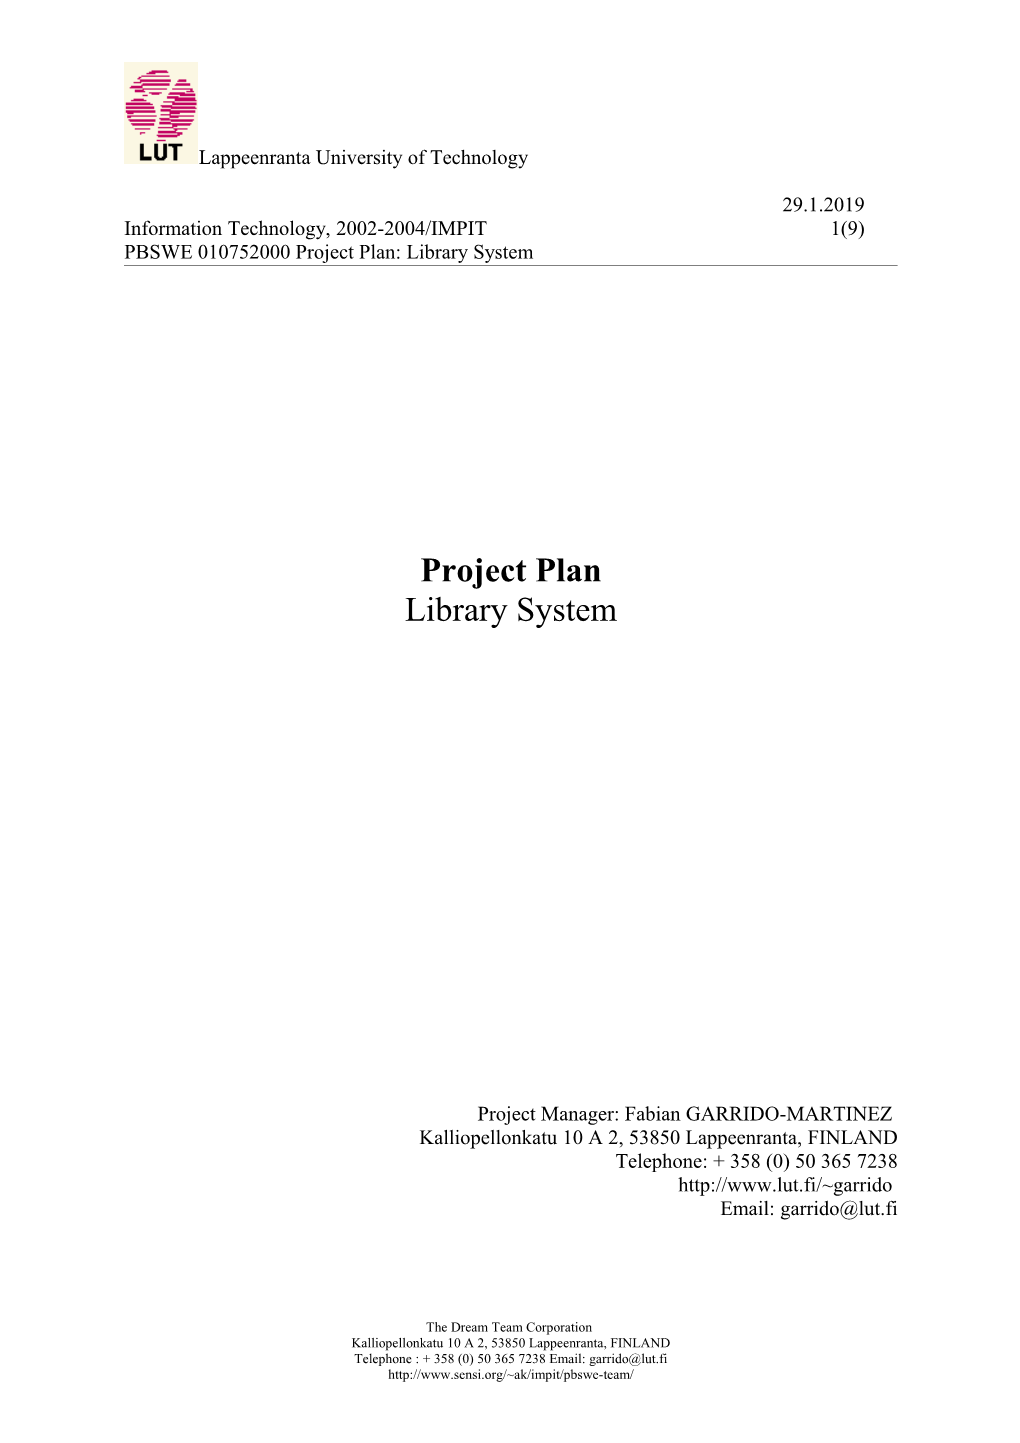 PBSWE 010752000 Project Plan: Library System